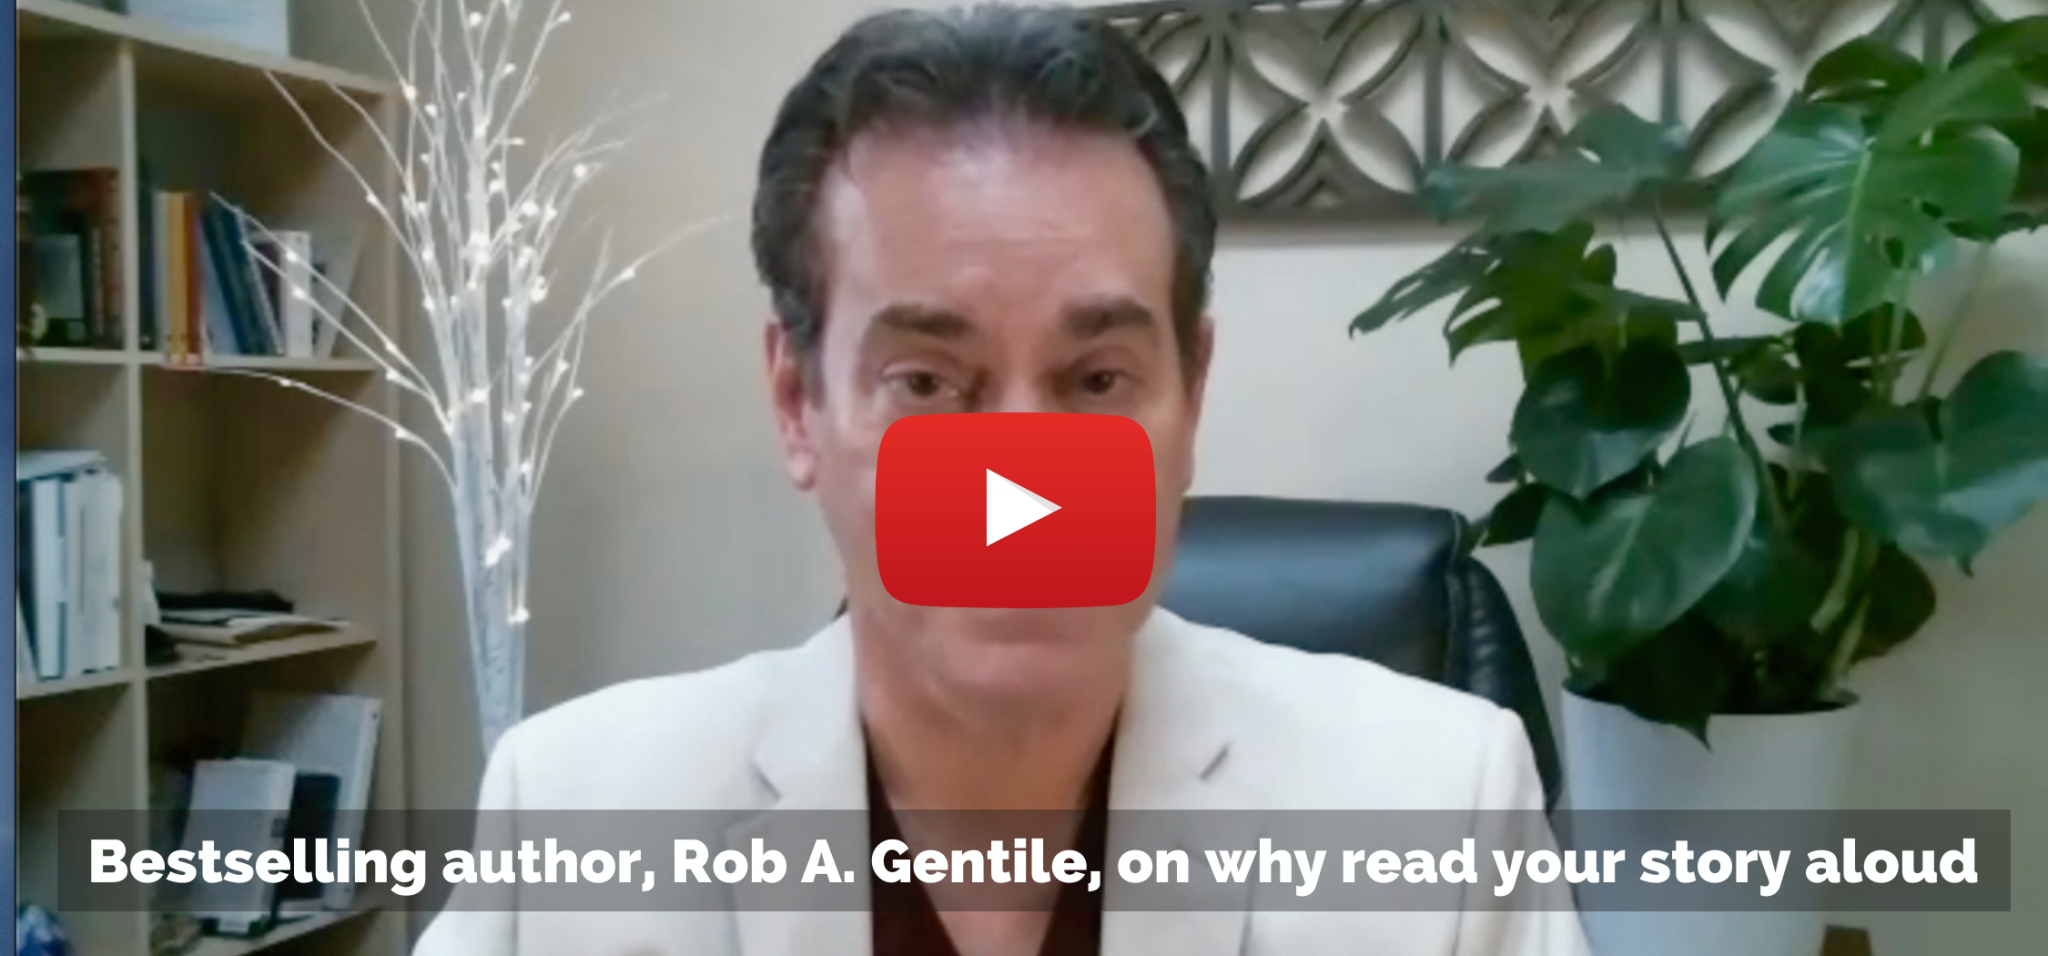 thumbnail of video: Bestselling author, Rob A. Gentile, on why read your story aloud